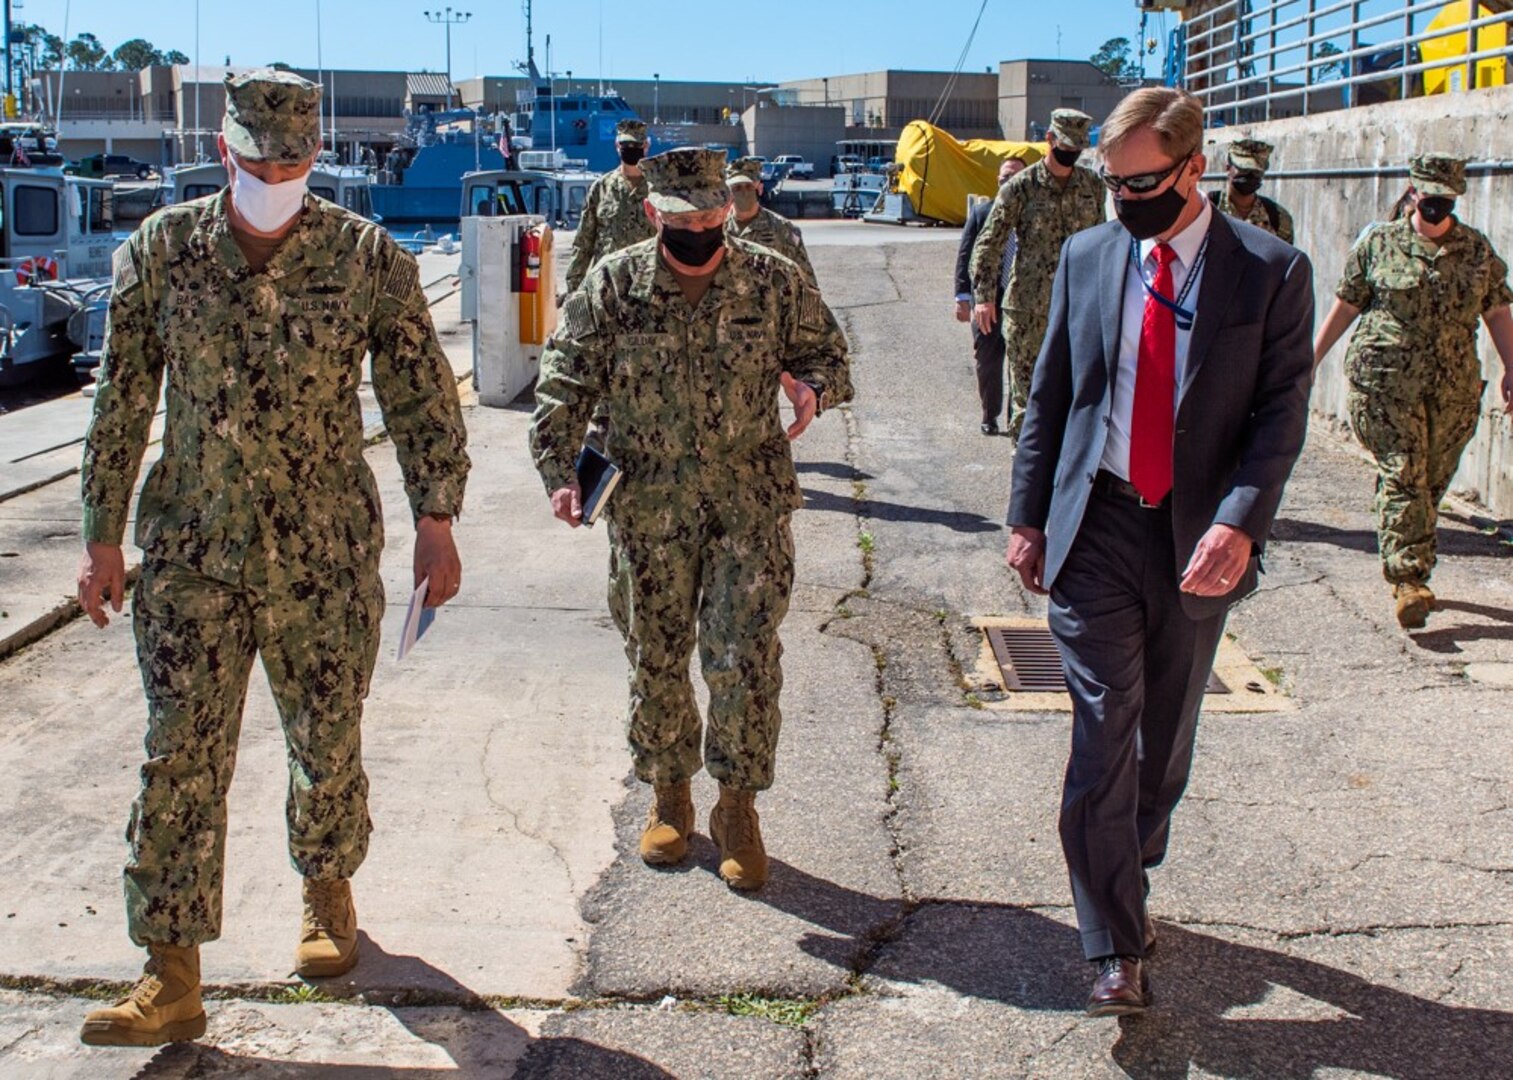 Capt. David Back (left), commanding officer at Naval Surface Warfare Center Panama City Division (NSWC PCD) and Dr. Peter Adair (right), NSWC PCD technical director provide a tour of unmanned systems with Adm. Mike Gilday, Chief of Naval Operations (center) March 4.